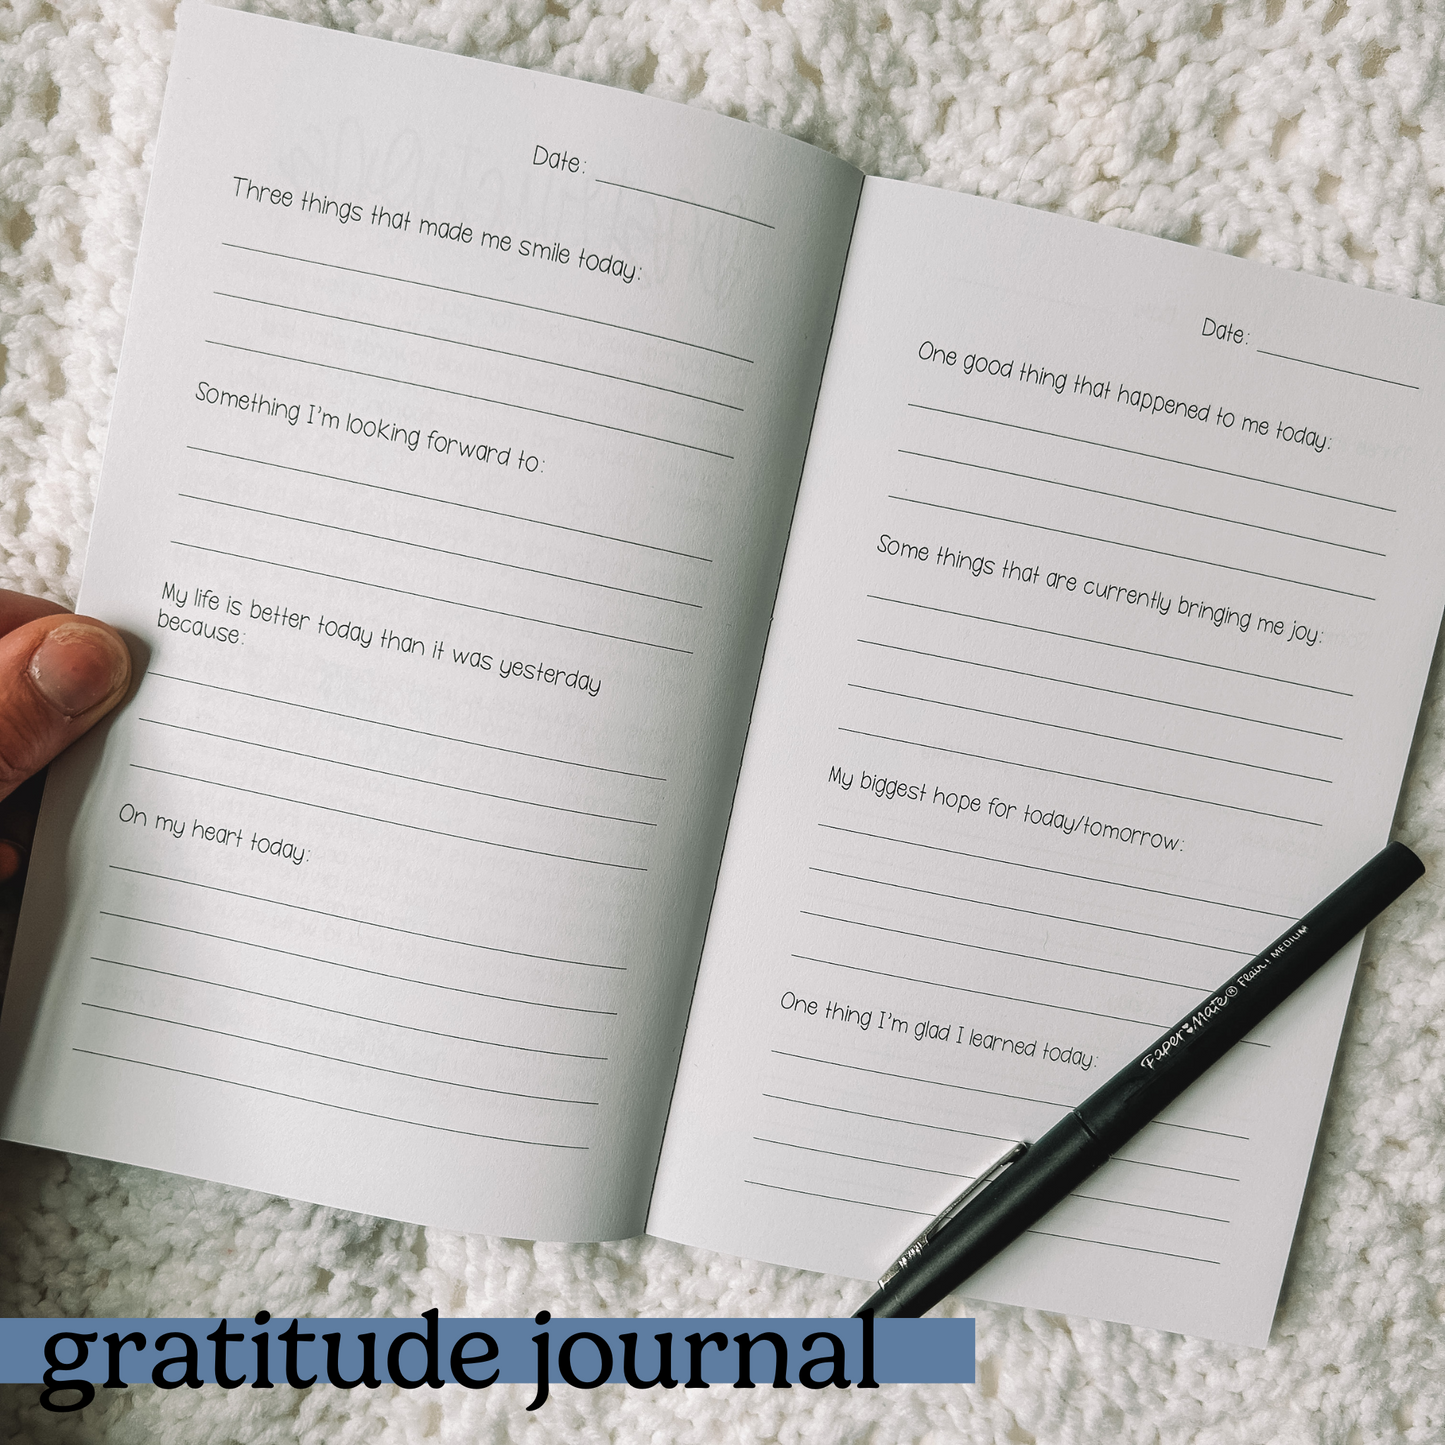 Two page spread of gratitude prompts. Date at the top and four prompts on each page.